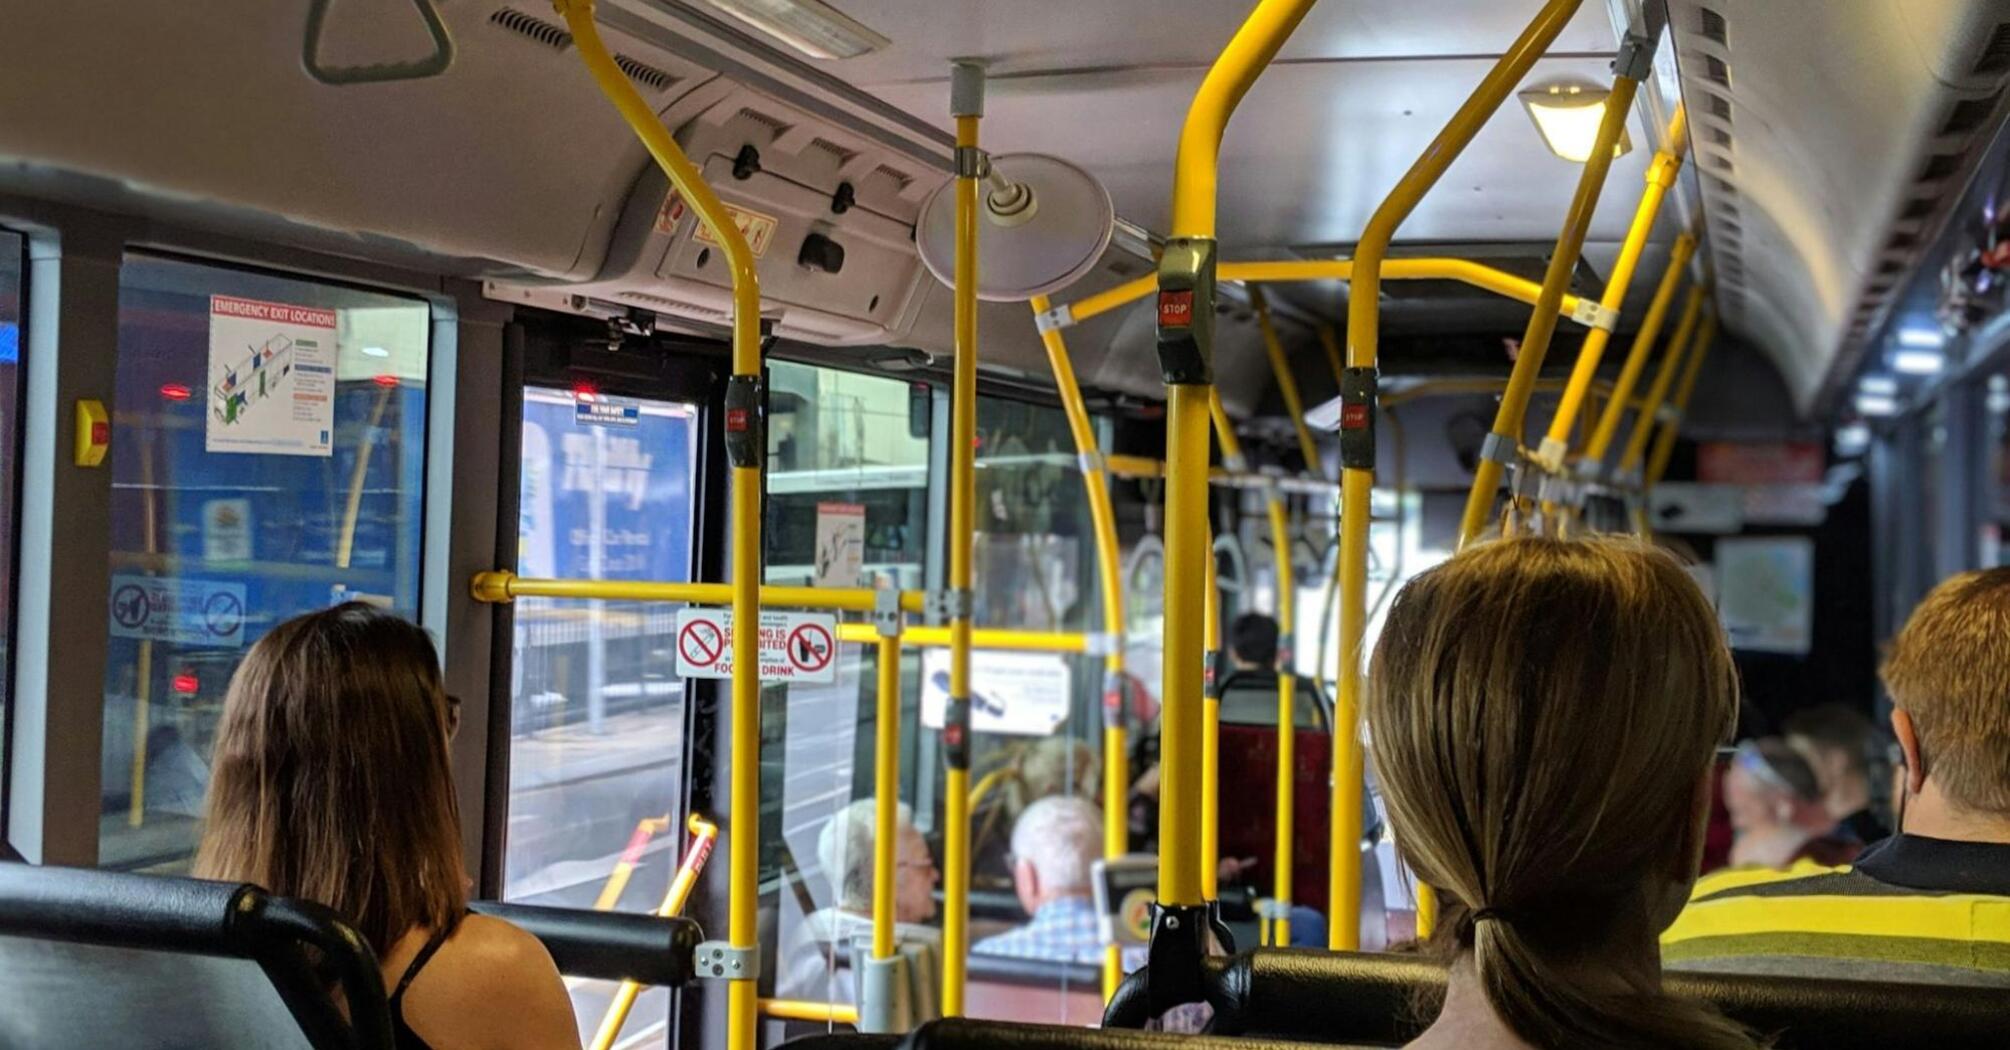 Inside view of a public bus with passengers seated